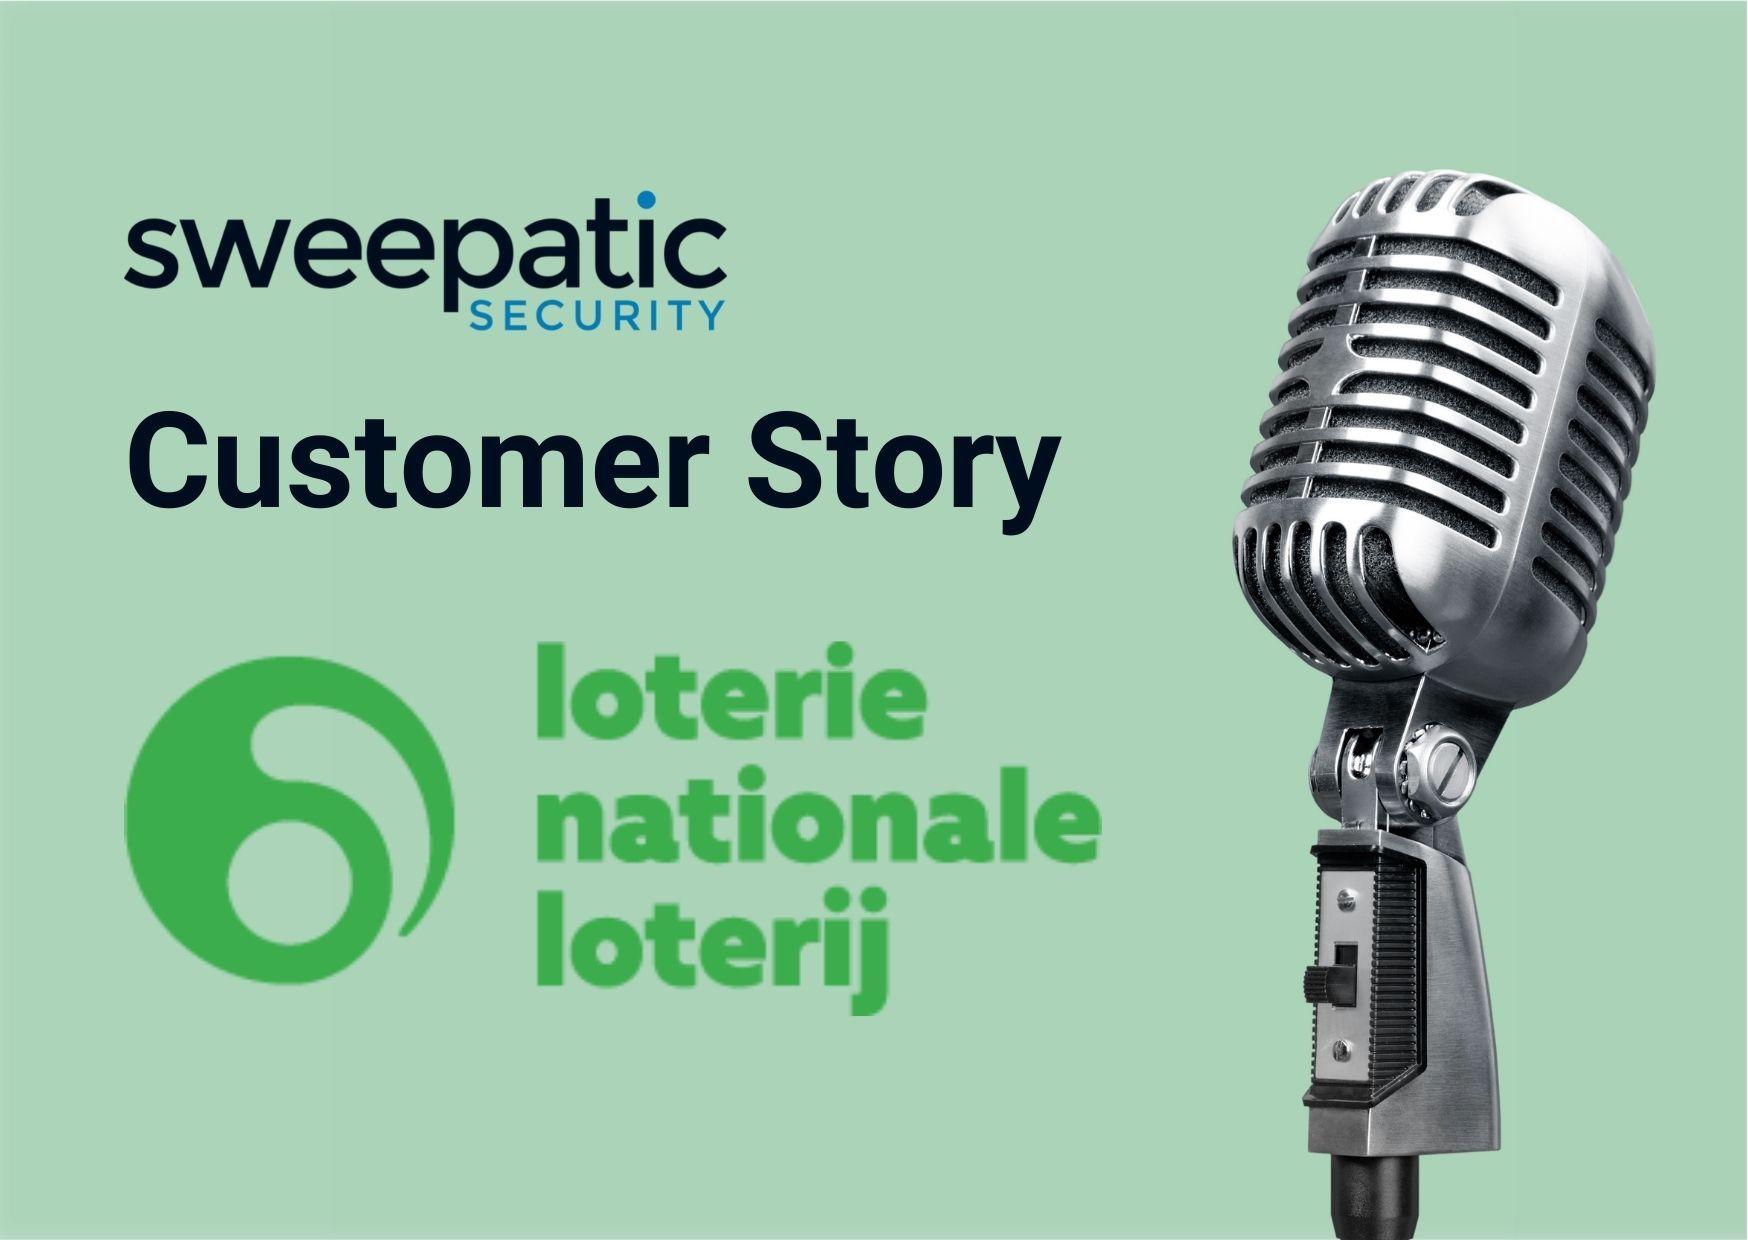 Cybersecurity in the Public Sector: the Belgian National Lottery story